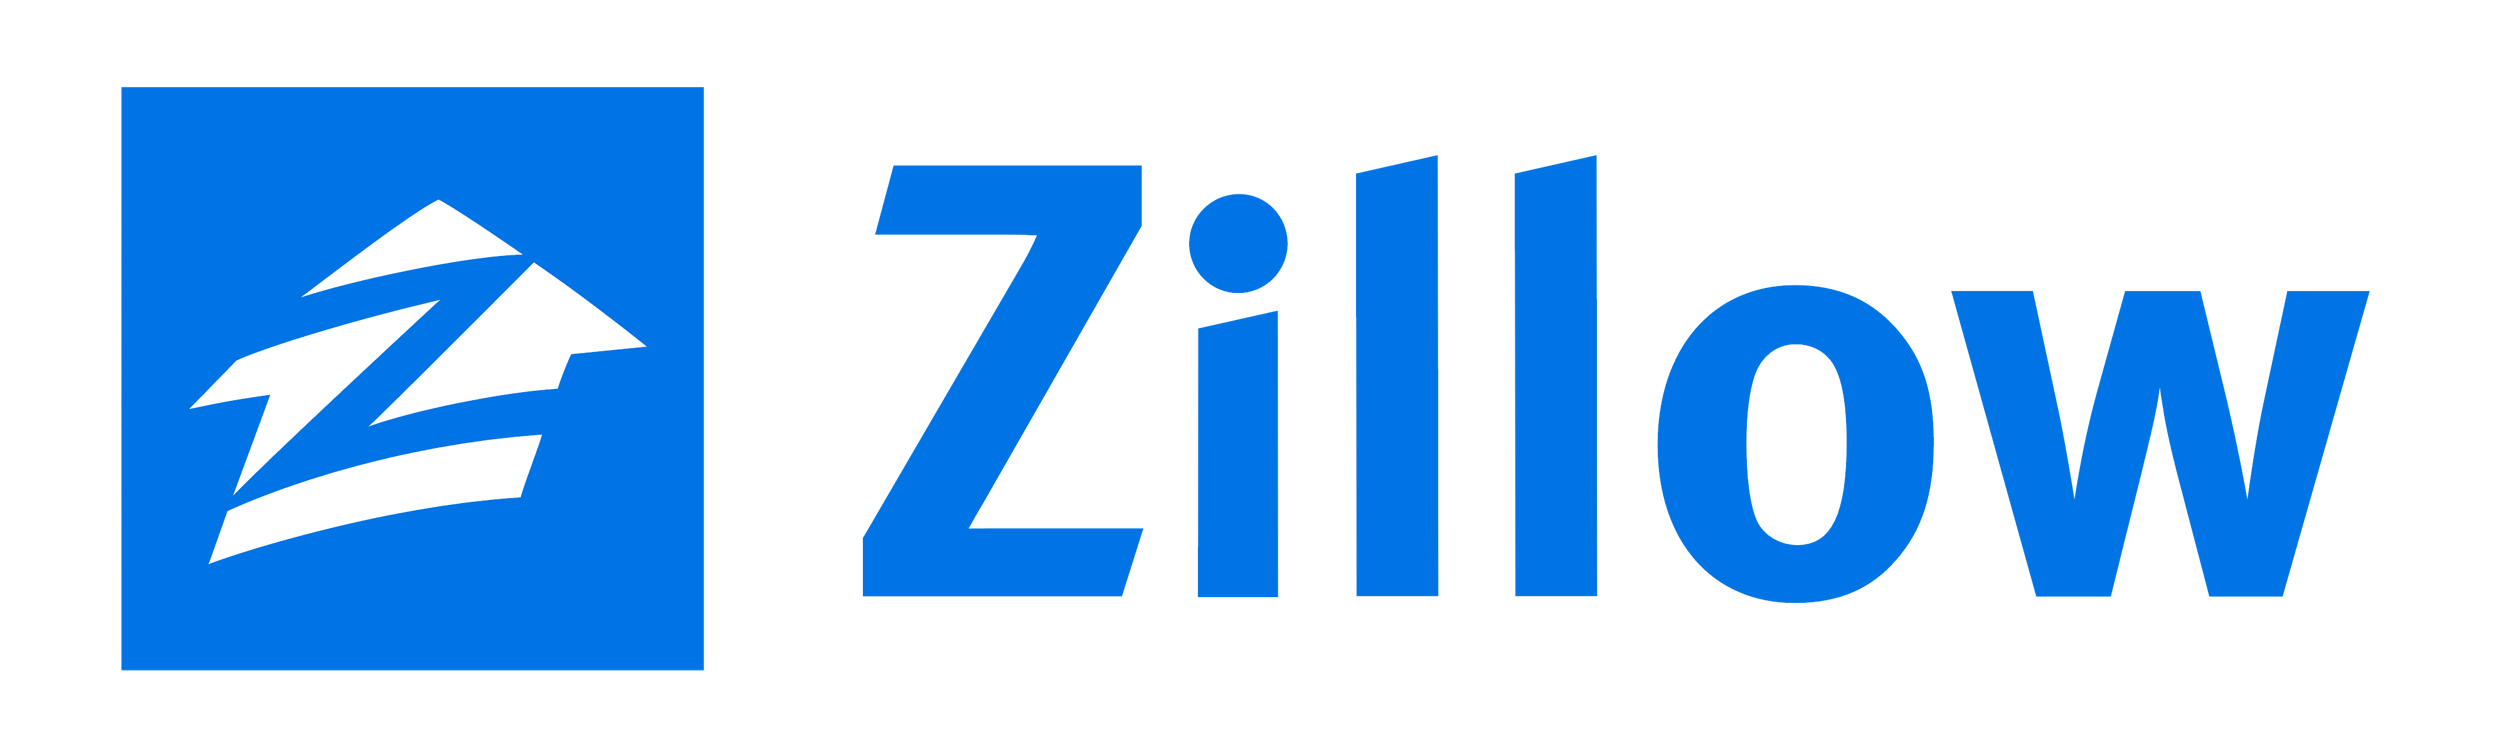 Zillow-Logo-2056431271.png